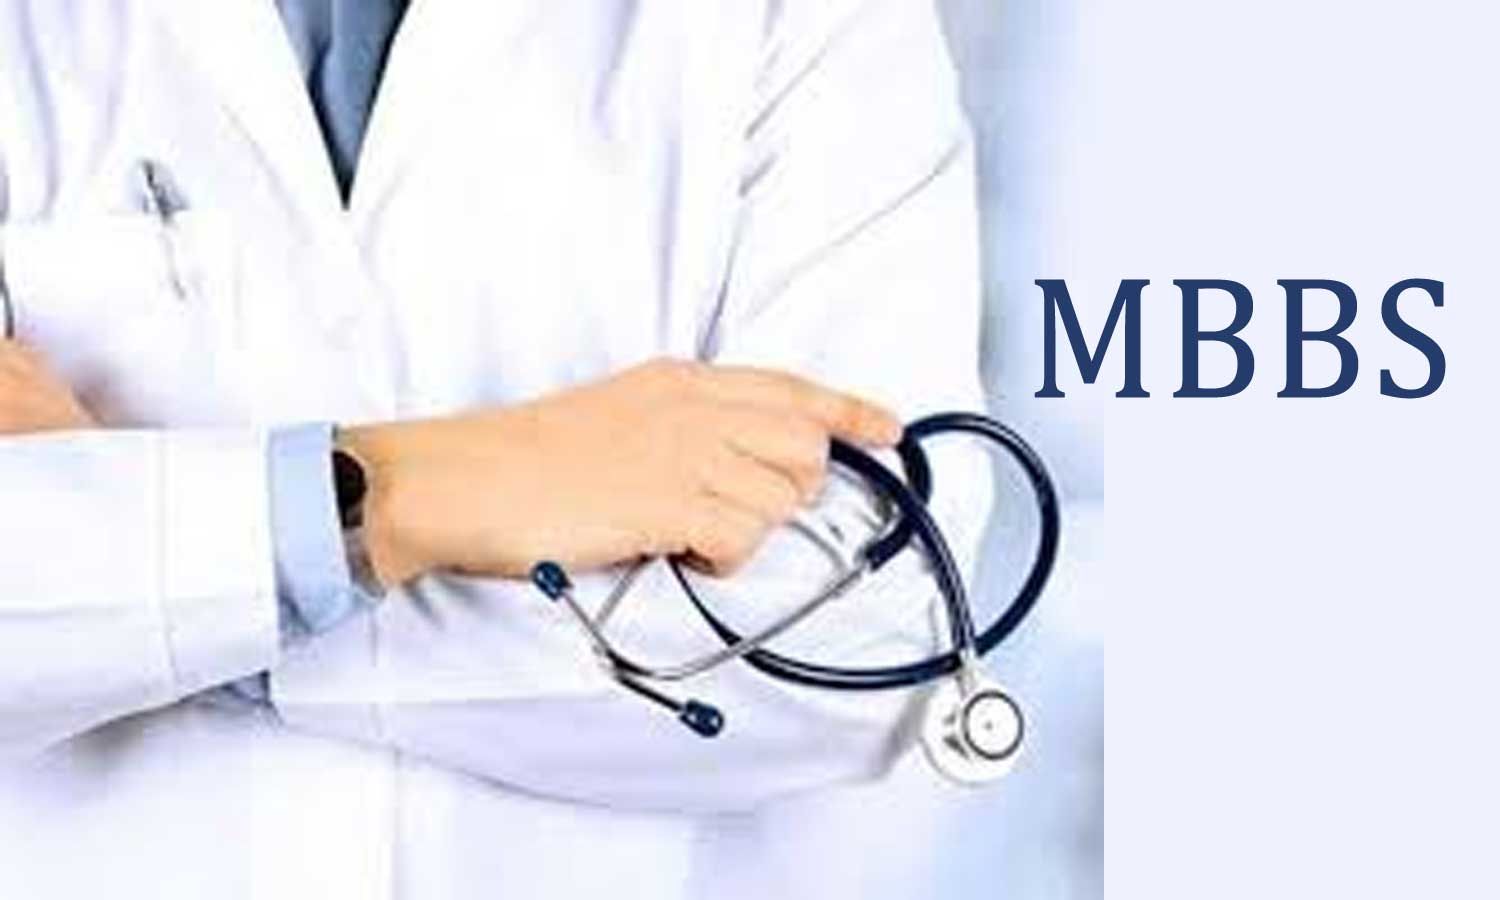 MBBS (Bachelor of Medicine and a Bachelor of Surgery) Courses, Admissions, Eligibility, Syllabus